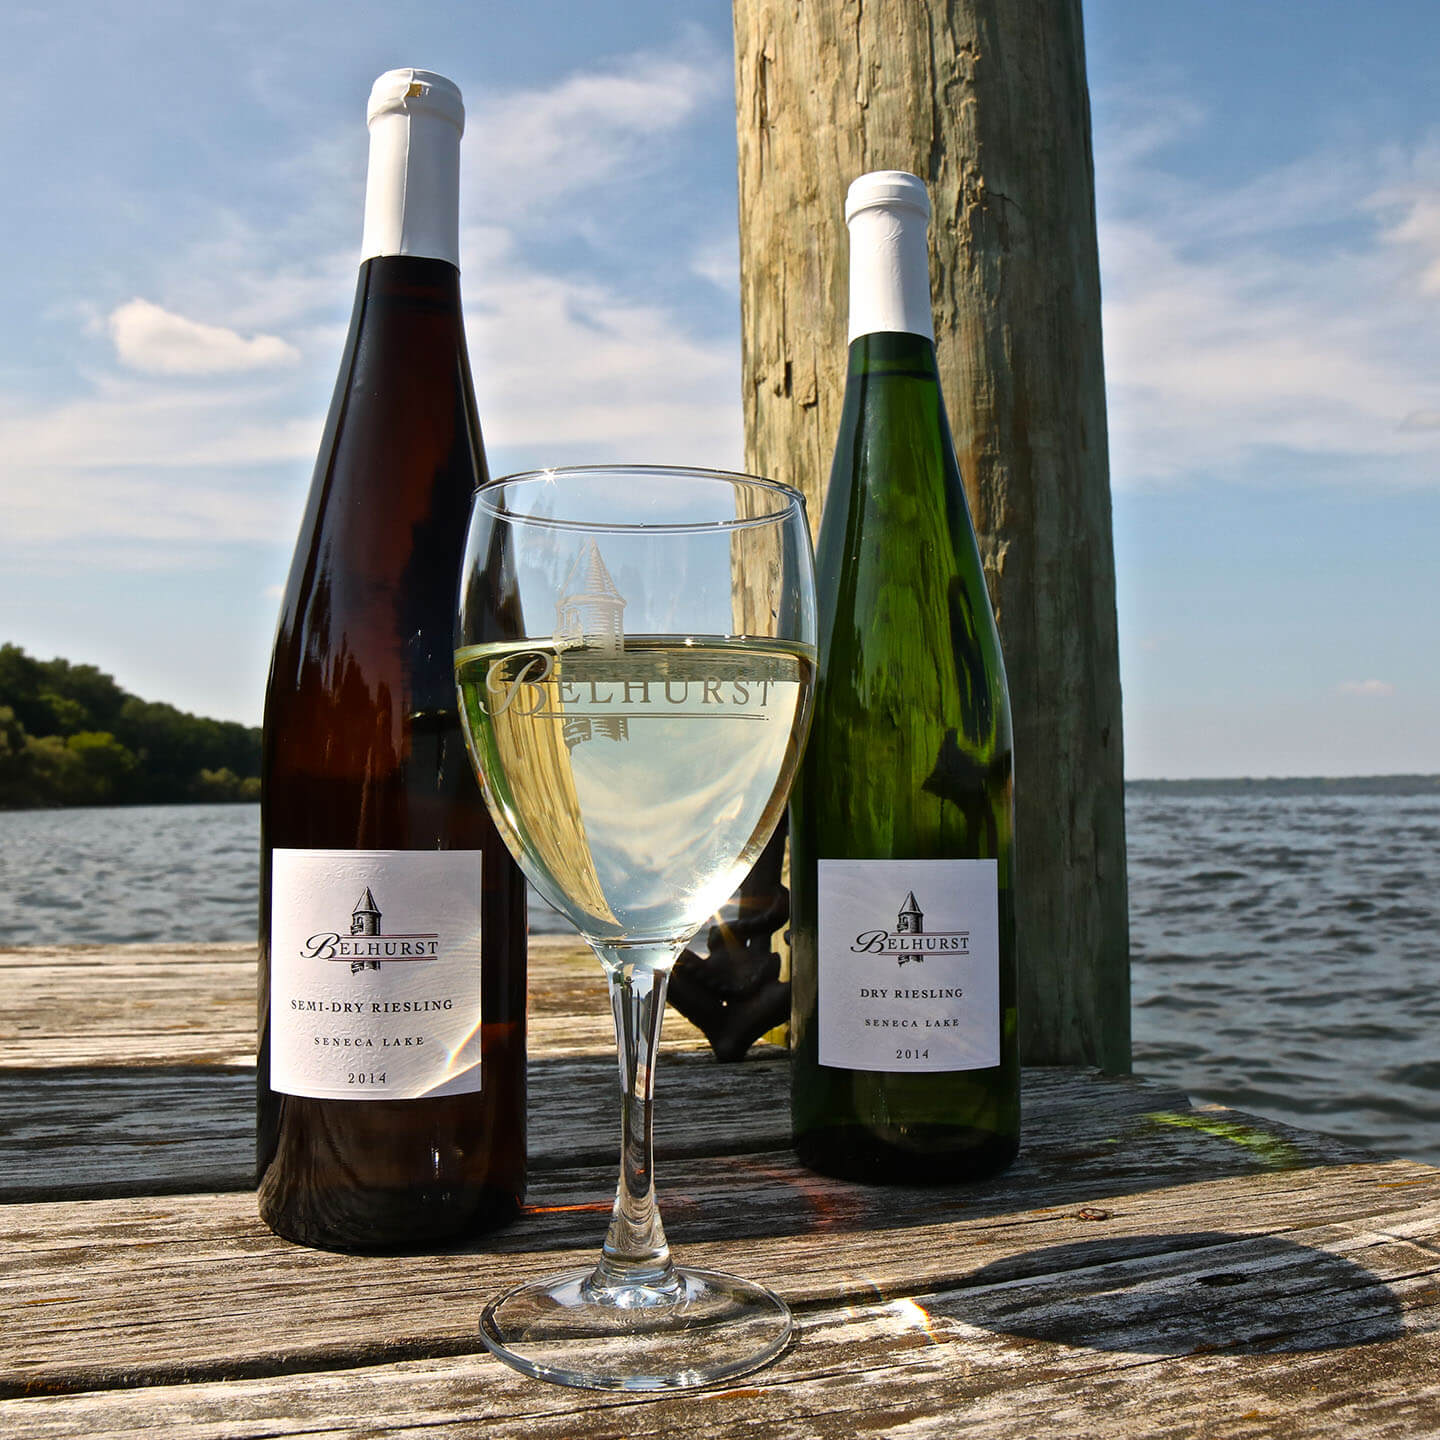 Two wine bottles and a glass of white win sitting on a dock.